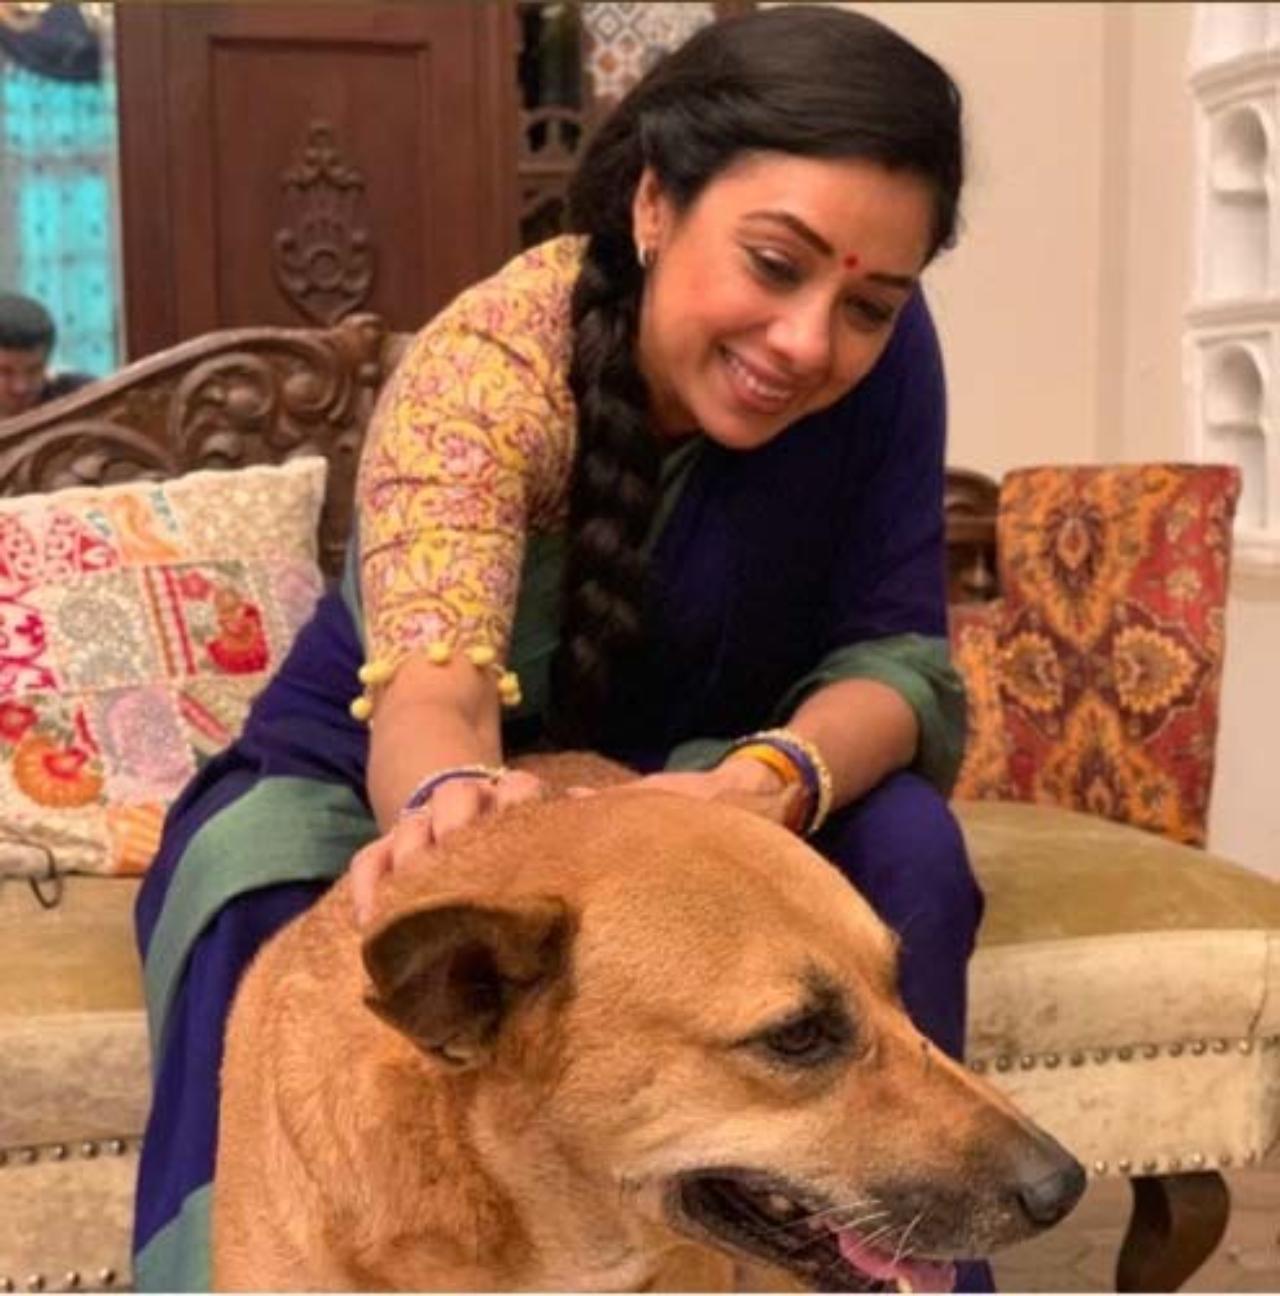 The talented actor from 'Anupamaa' stands firmly as an advocate for animal rights, consistently using her social media platforms to raise awareness surrounding this issue. In this photo, Rupali Ganguly can be seen taking care of a pregnant dog on the sets of 'Anupamaa' - it is evident that protective instincts extend beyond her pets at home and also toward animals in need of help in the wild